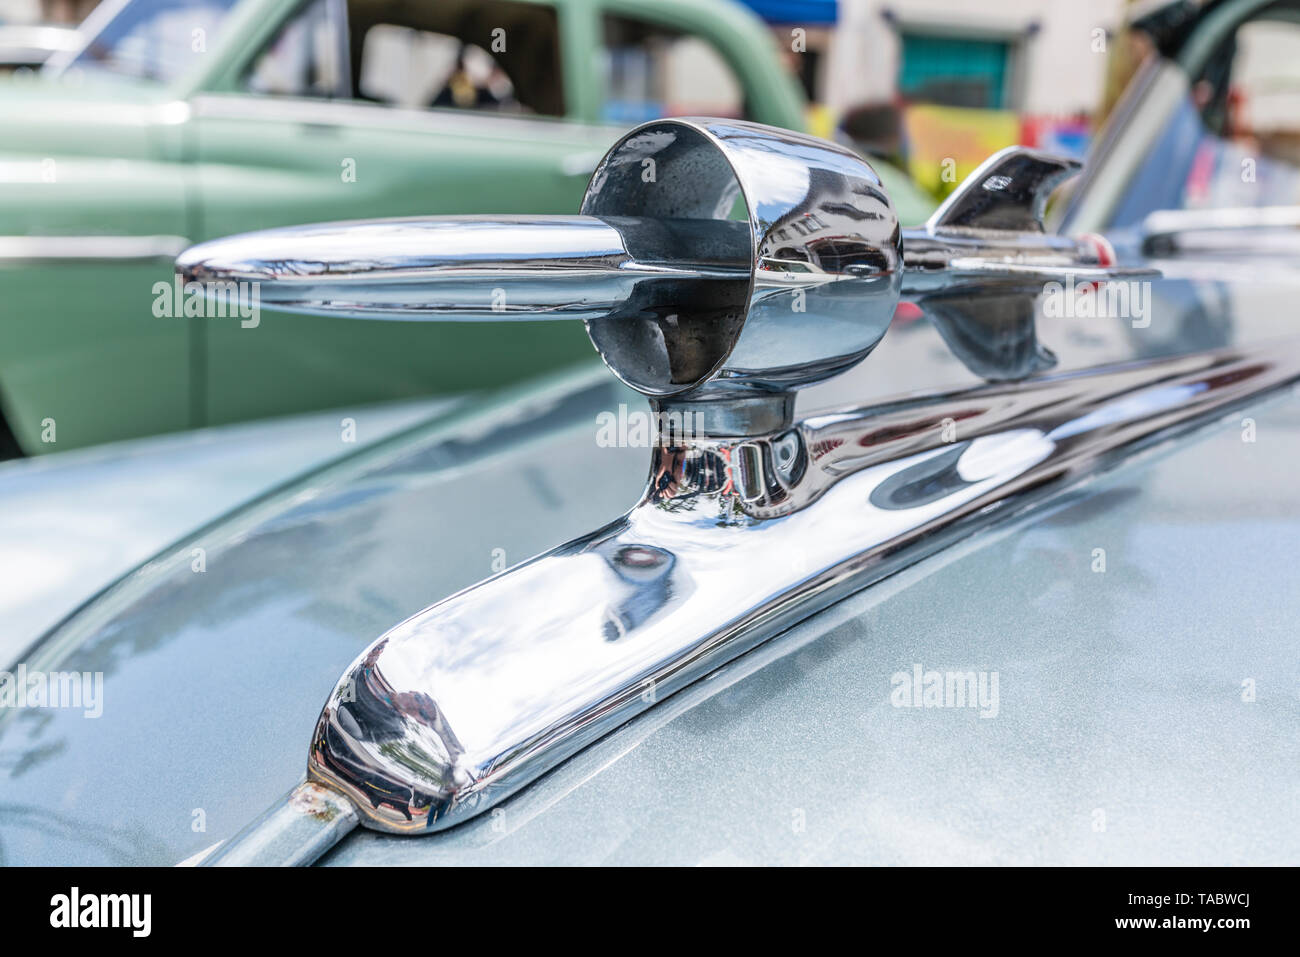 https://c8.alamy.com/comp/TABWCJ/rocket-hood-ornament-on-classic-car-at-the-state-street-nationals-premier-car-show-on-may-19th-2019-on-state-street-which-was-closed-to-traffic-to-al-TABWCJ.jpg